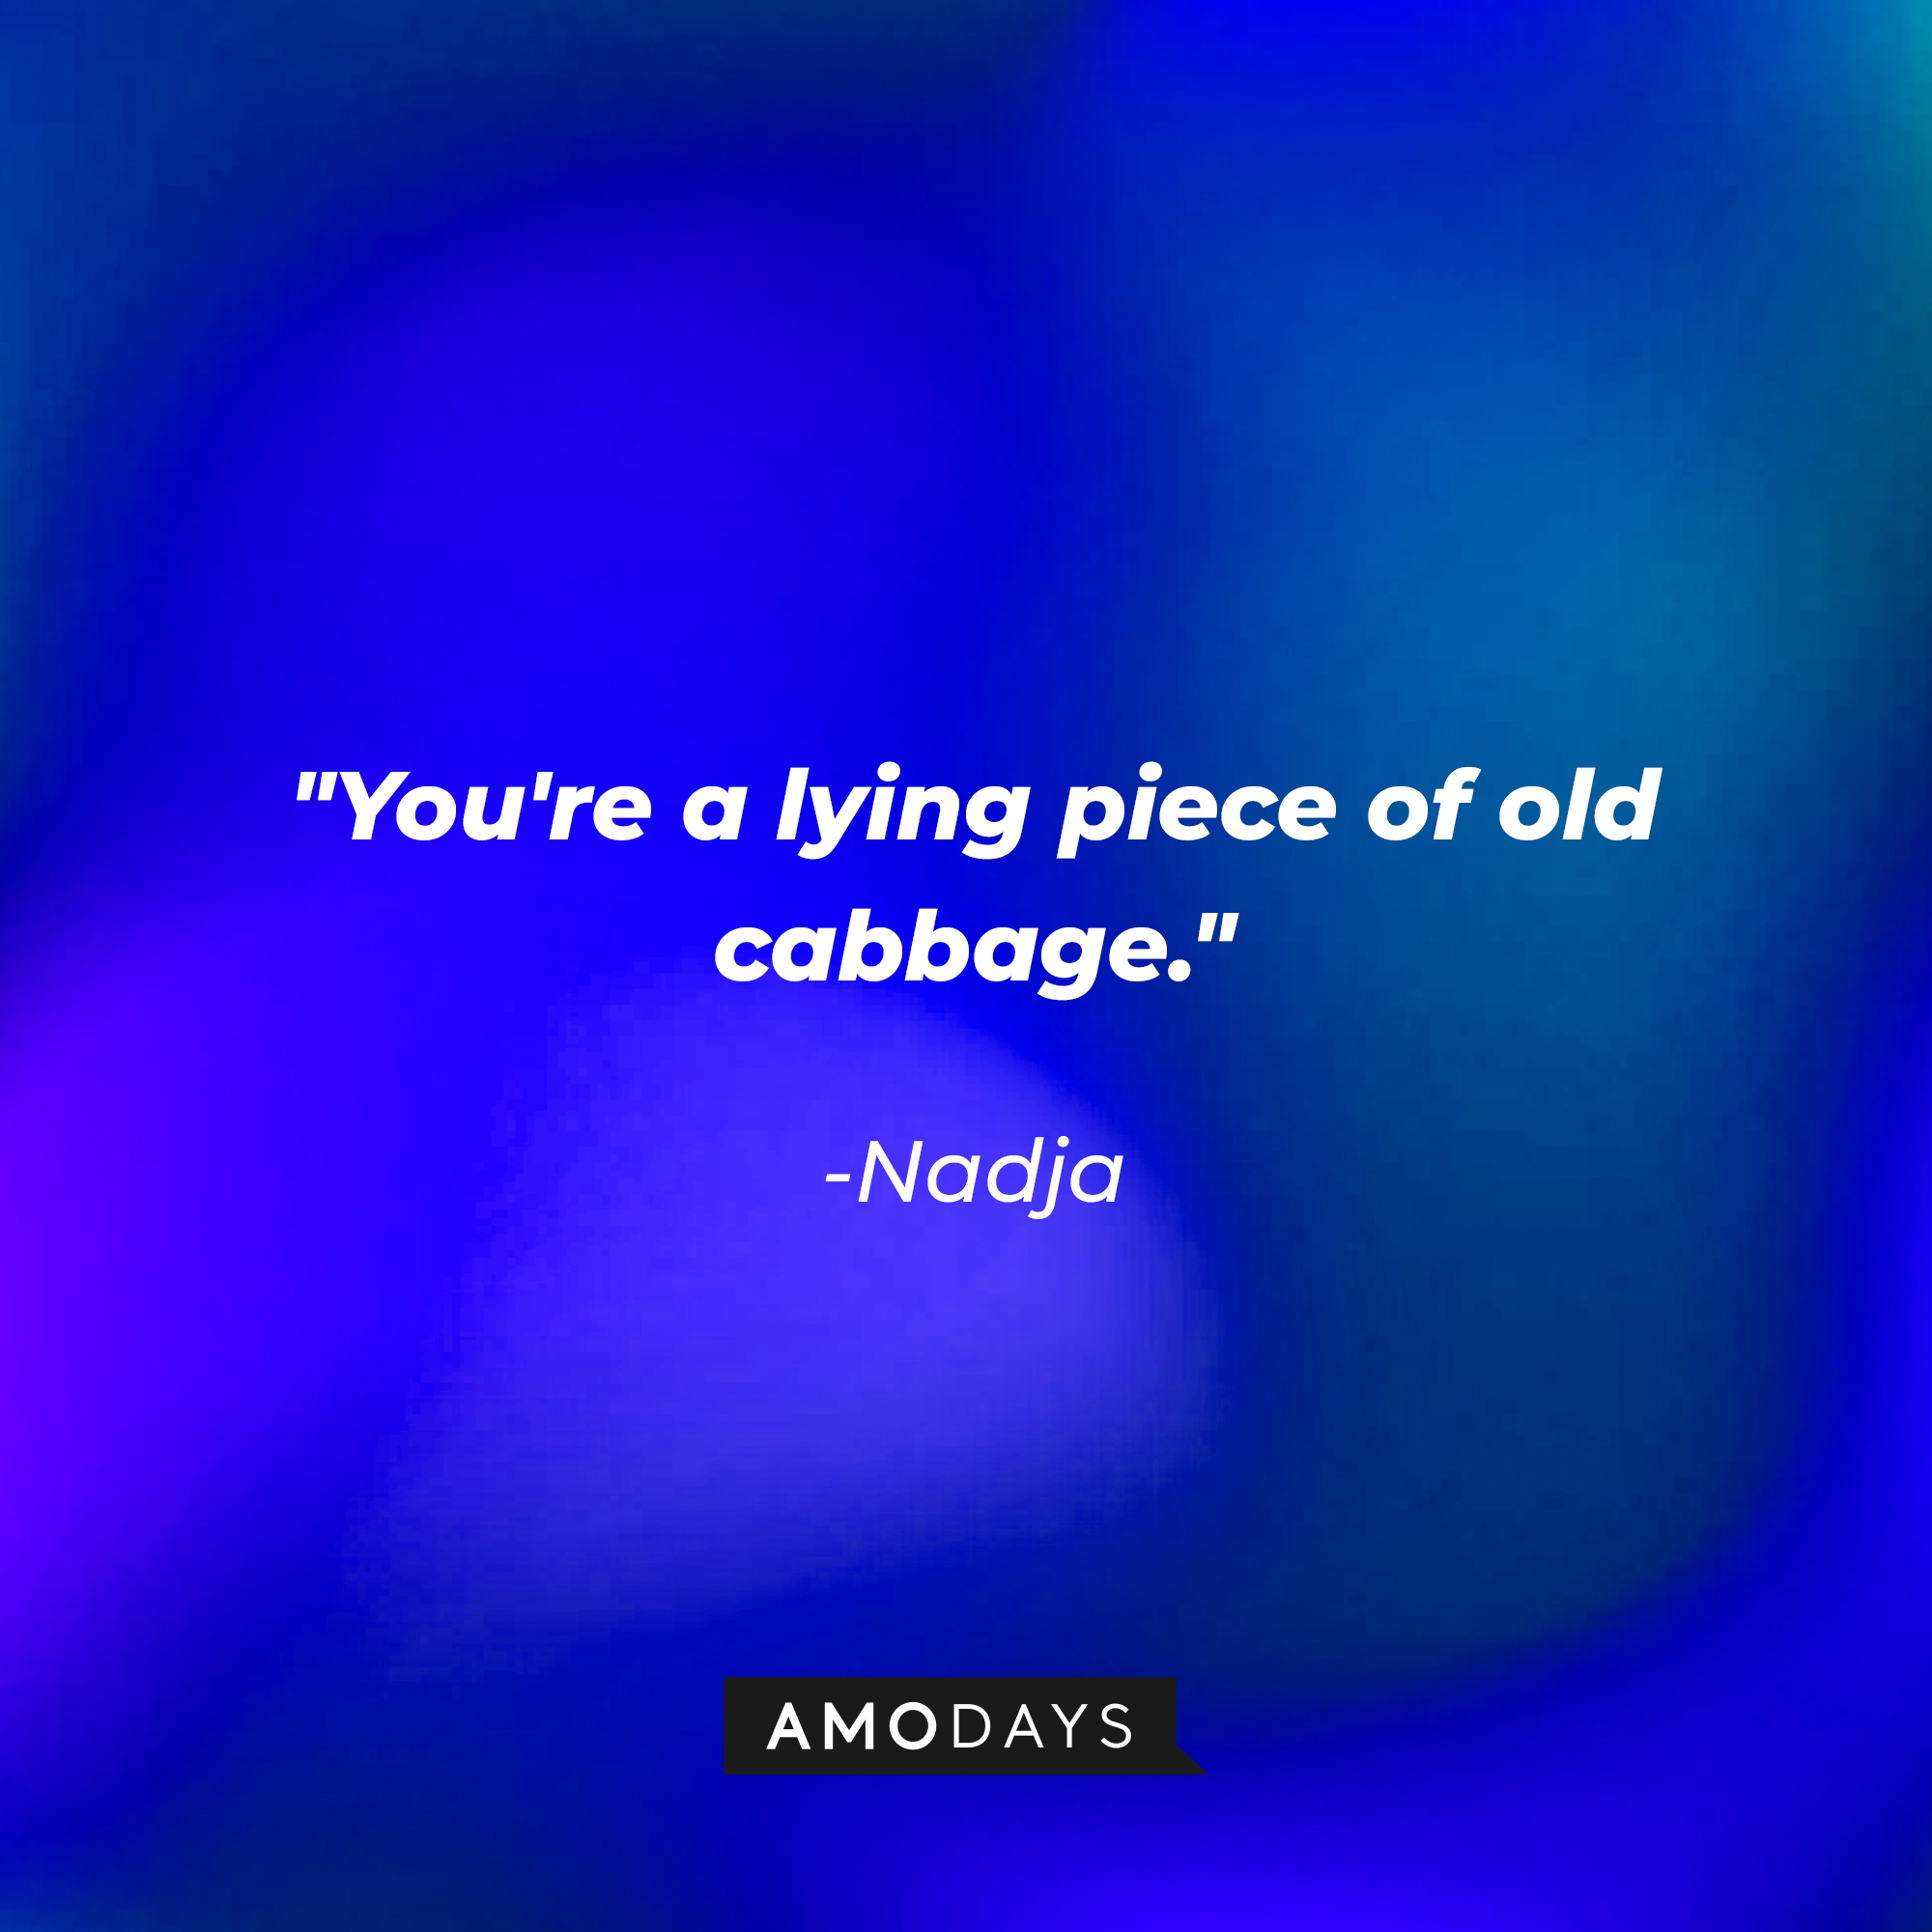 Nadja’s quote: "You're a lying piece of old cabbage." | Source: Amodays